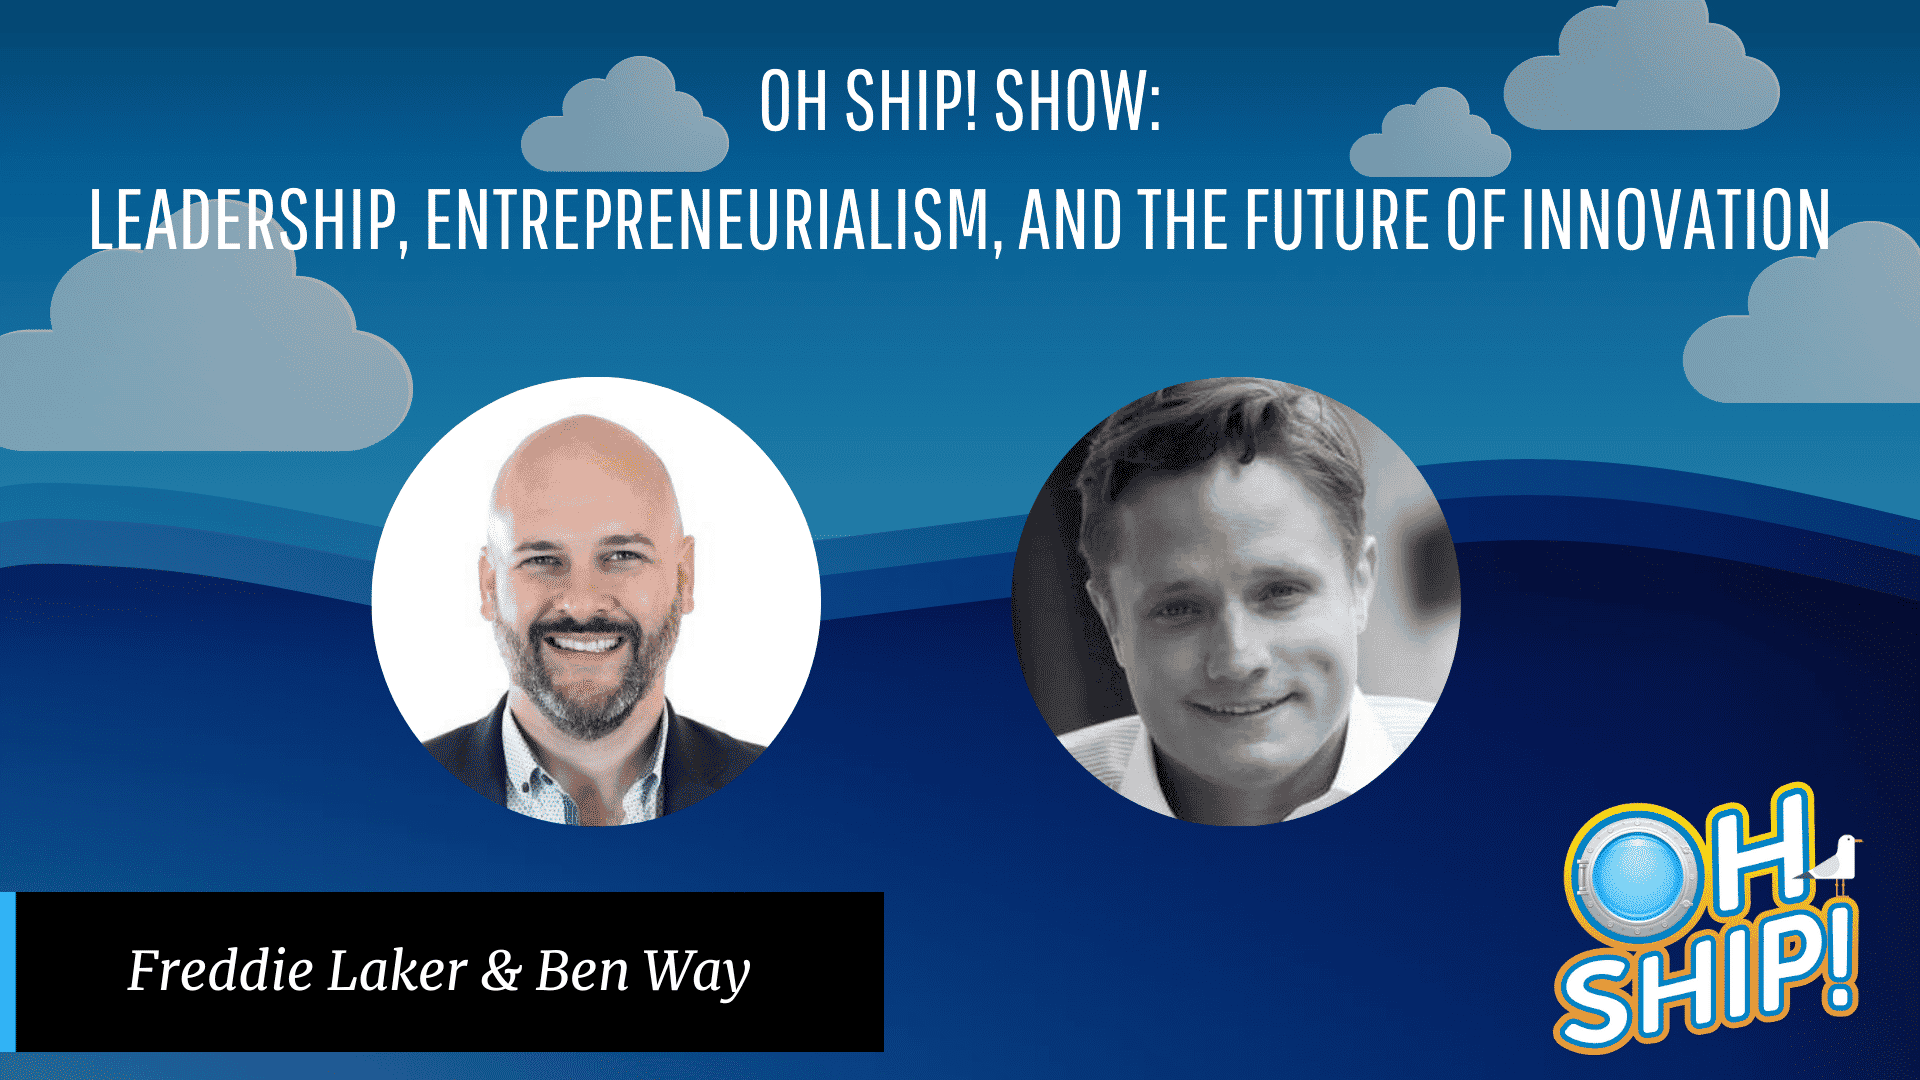 A promotional graphic for the "Oh Ship! Show" featuring headshots of entrepreneurs Freddie Laker and Ben Way. The text reads: "OH SHIP! SHOW: Leadership, Entrepreneurialism, and the Future of Innovation." The background depicts a blue sky with white clouds and the show's logo.